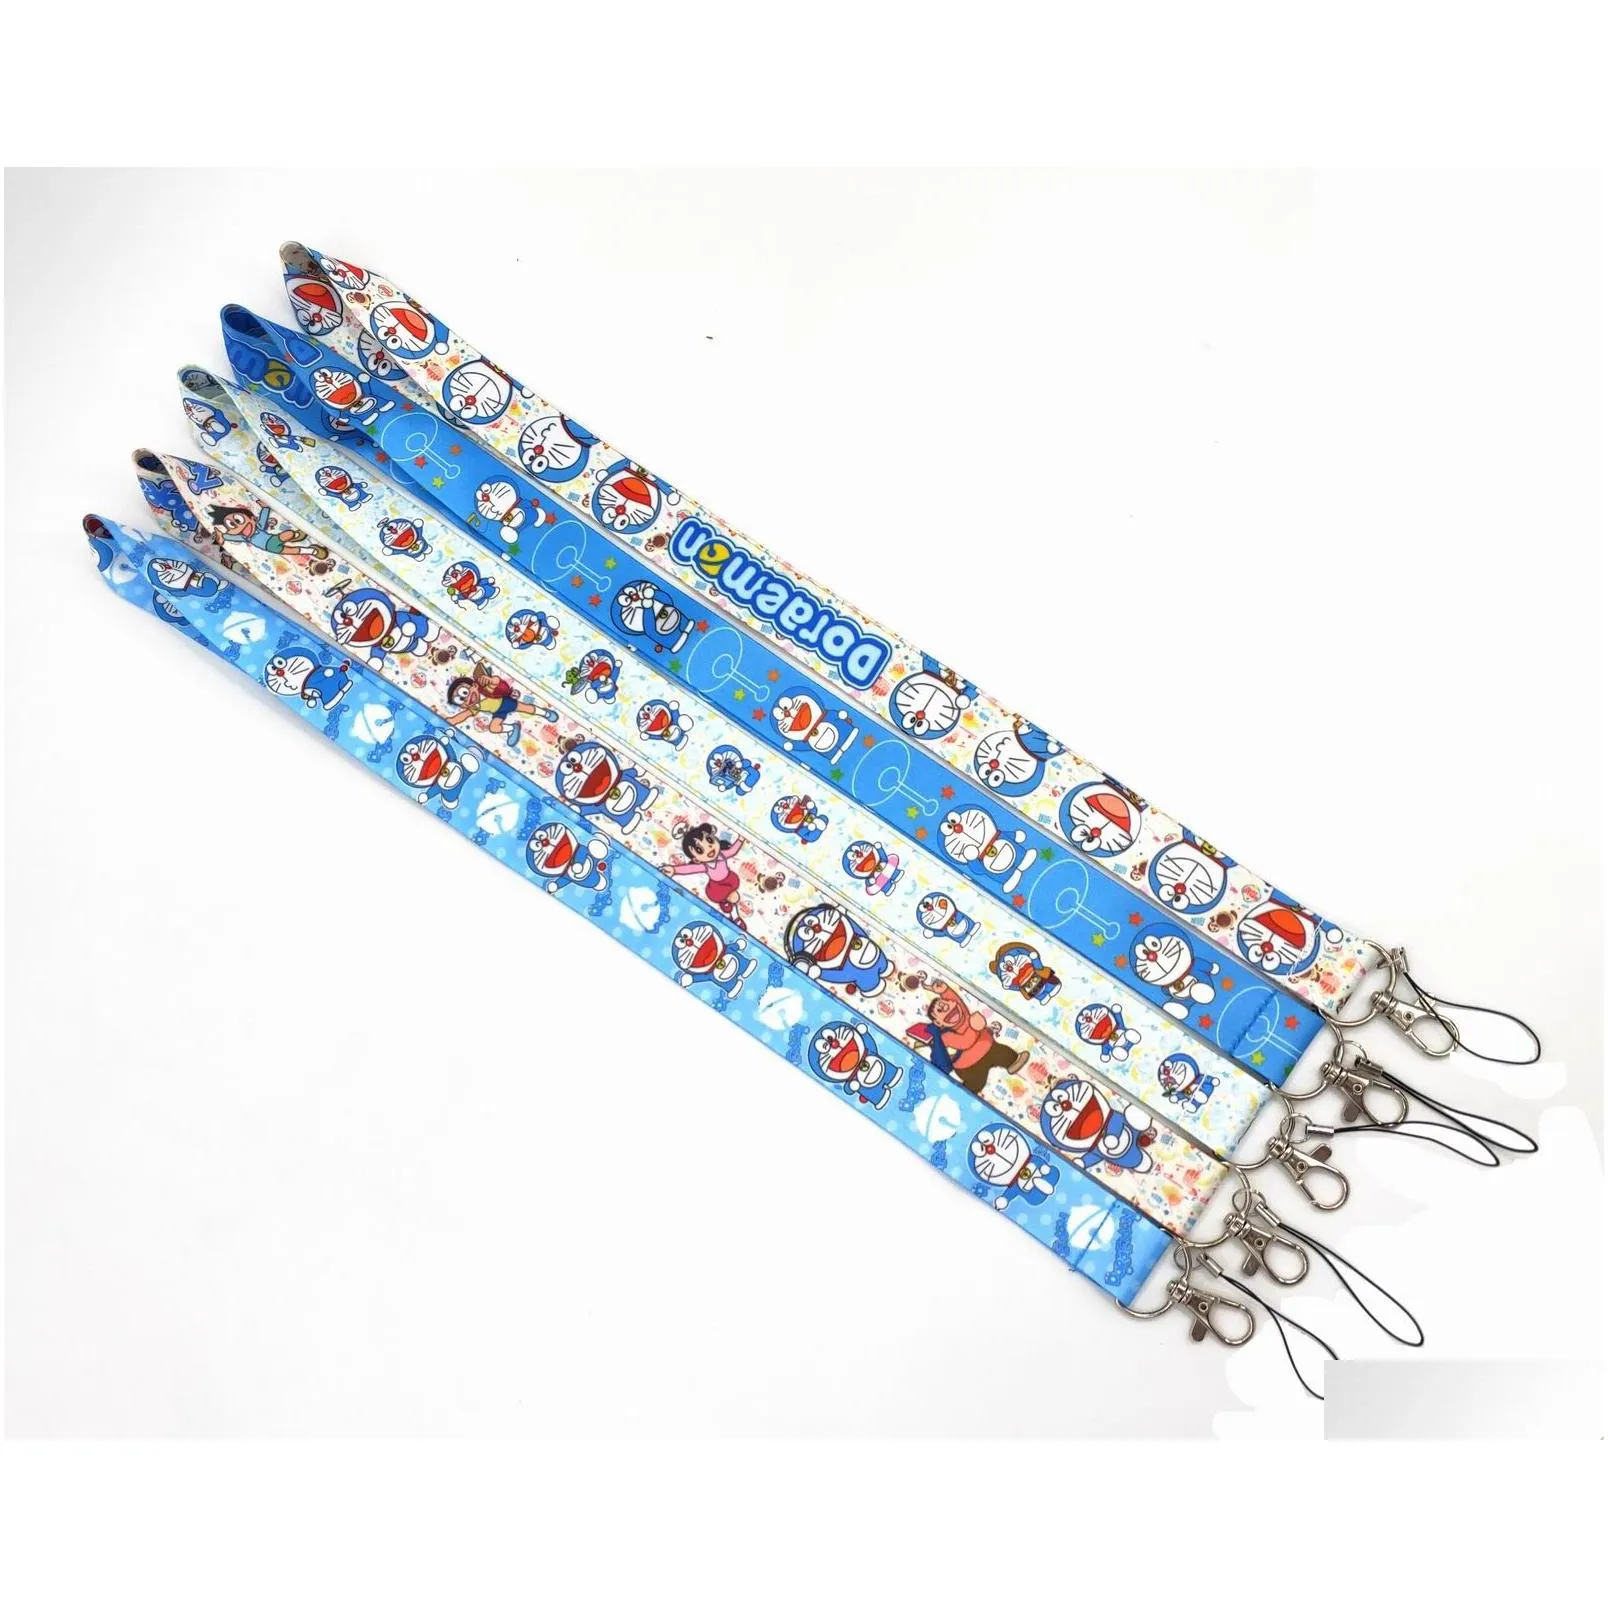 factory price 100 piec doraemon anime lanyard keychain neck strap key camera id phone string pendant badge party gift accessories